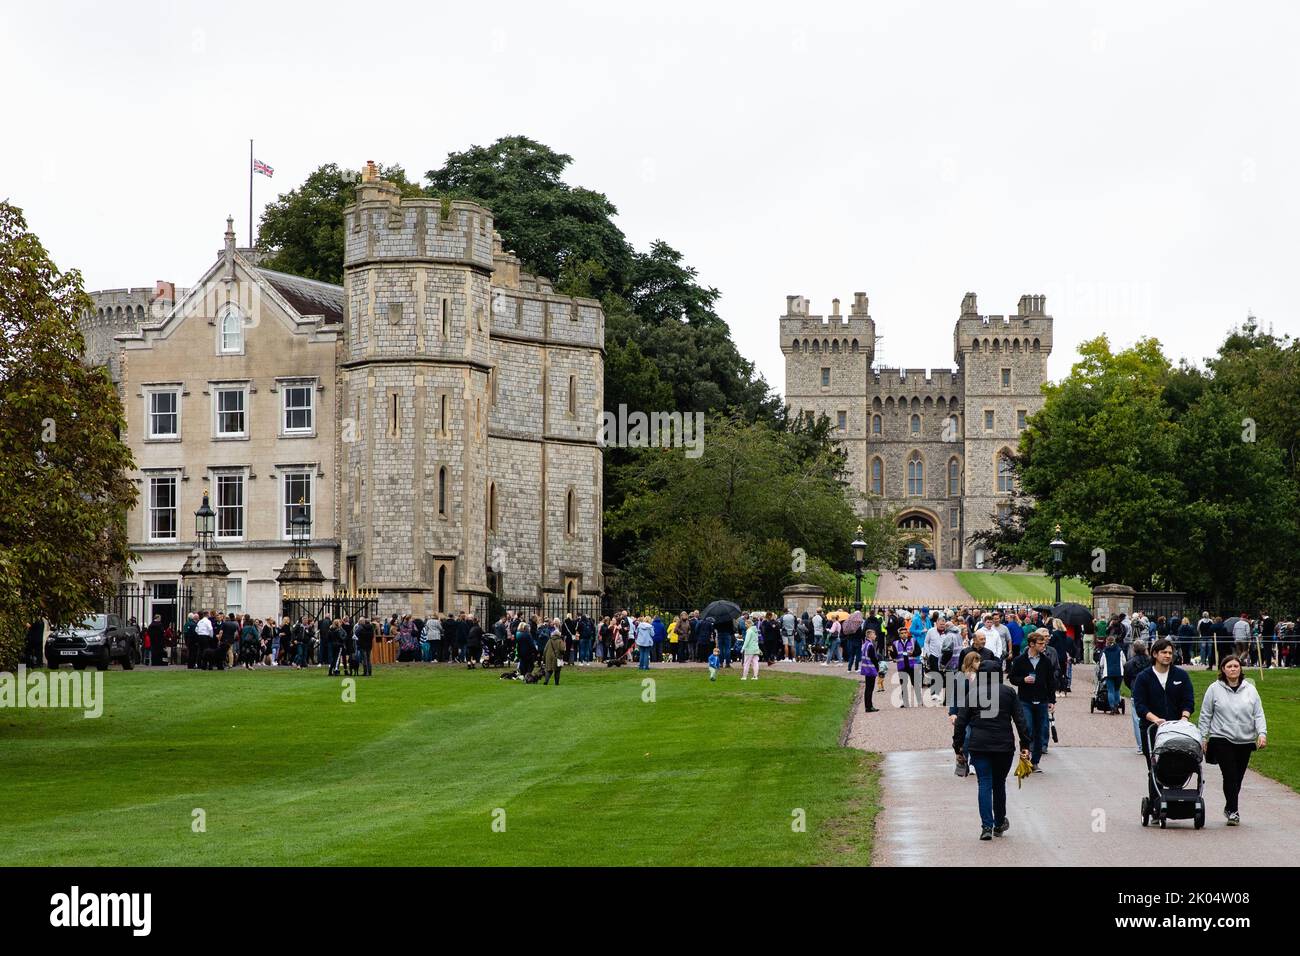 Windsor, UK. 9th September, 2022. Visitors arrive to leave floral tributes outside Cambridge Gate at Windsor Castle a day after the death of Queen Elizabeth II. Queen Elizabeth II, the UK's longest-serving monarch, died at Balmoral aged 96 after a reign lasting 70 years. Credit: Mark Kerrison/Alamy Live News Stock Photo